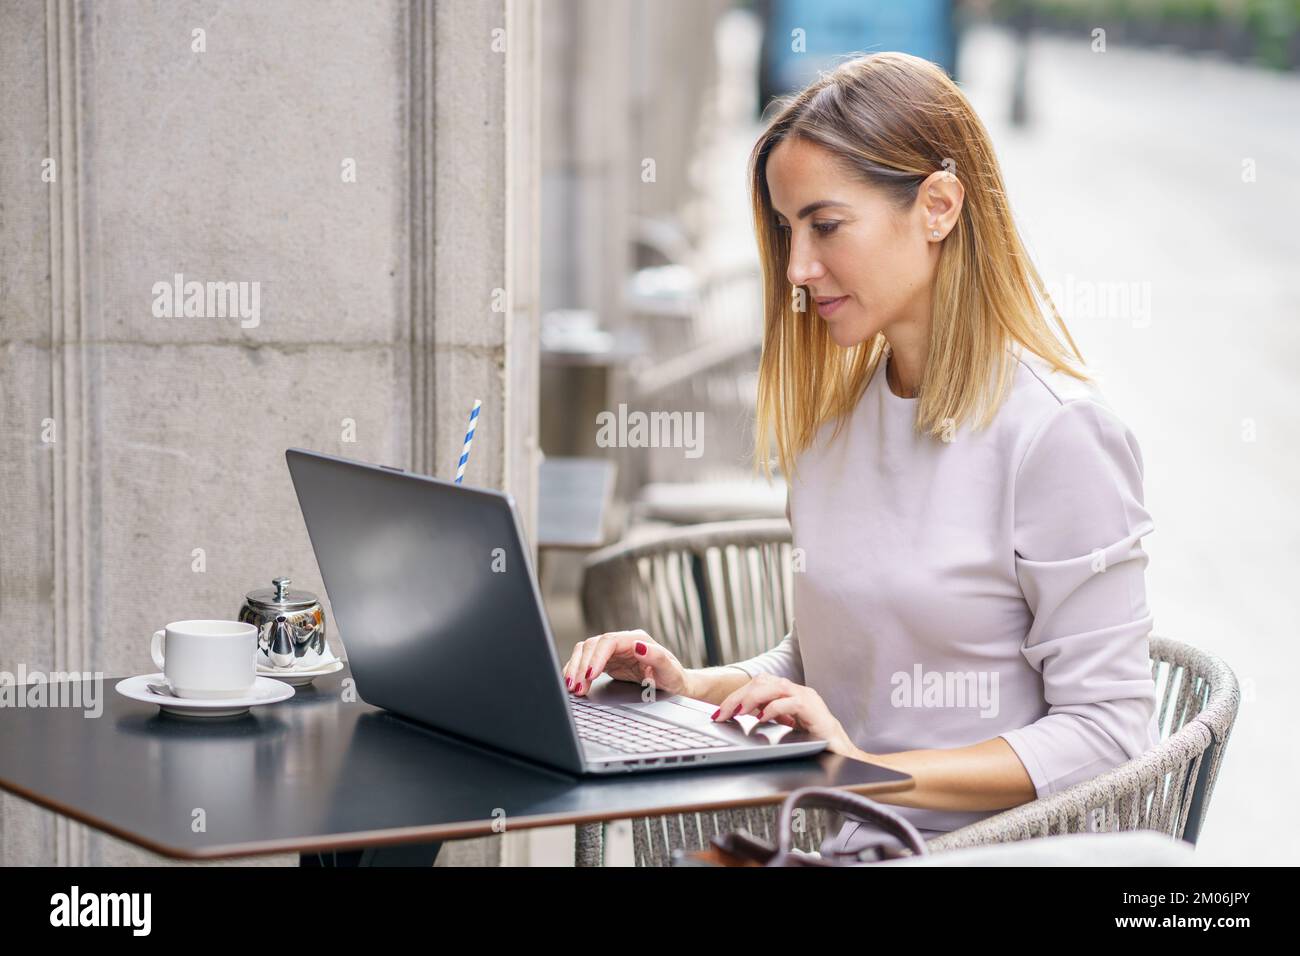 Focused female remote worker using laptop on cafe terrace Stock Photo